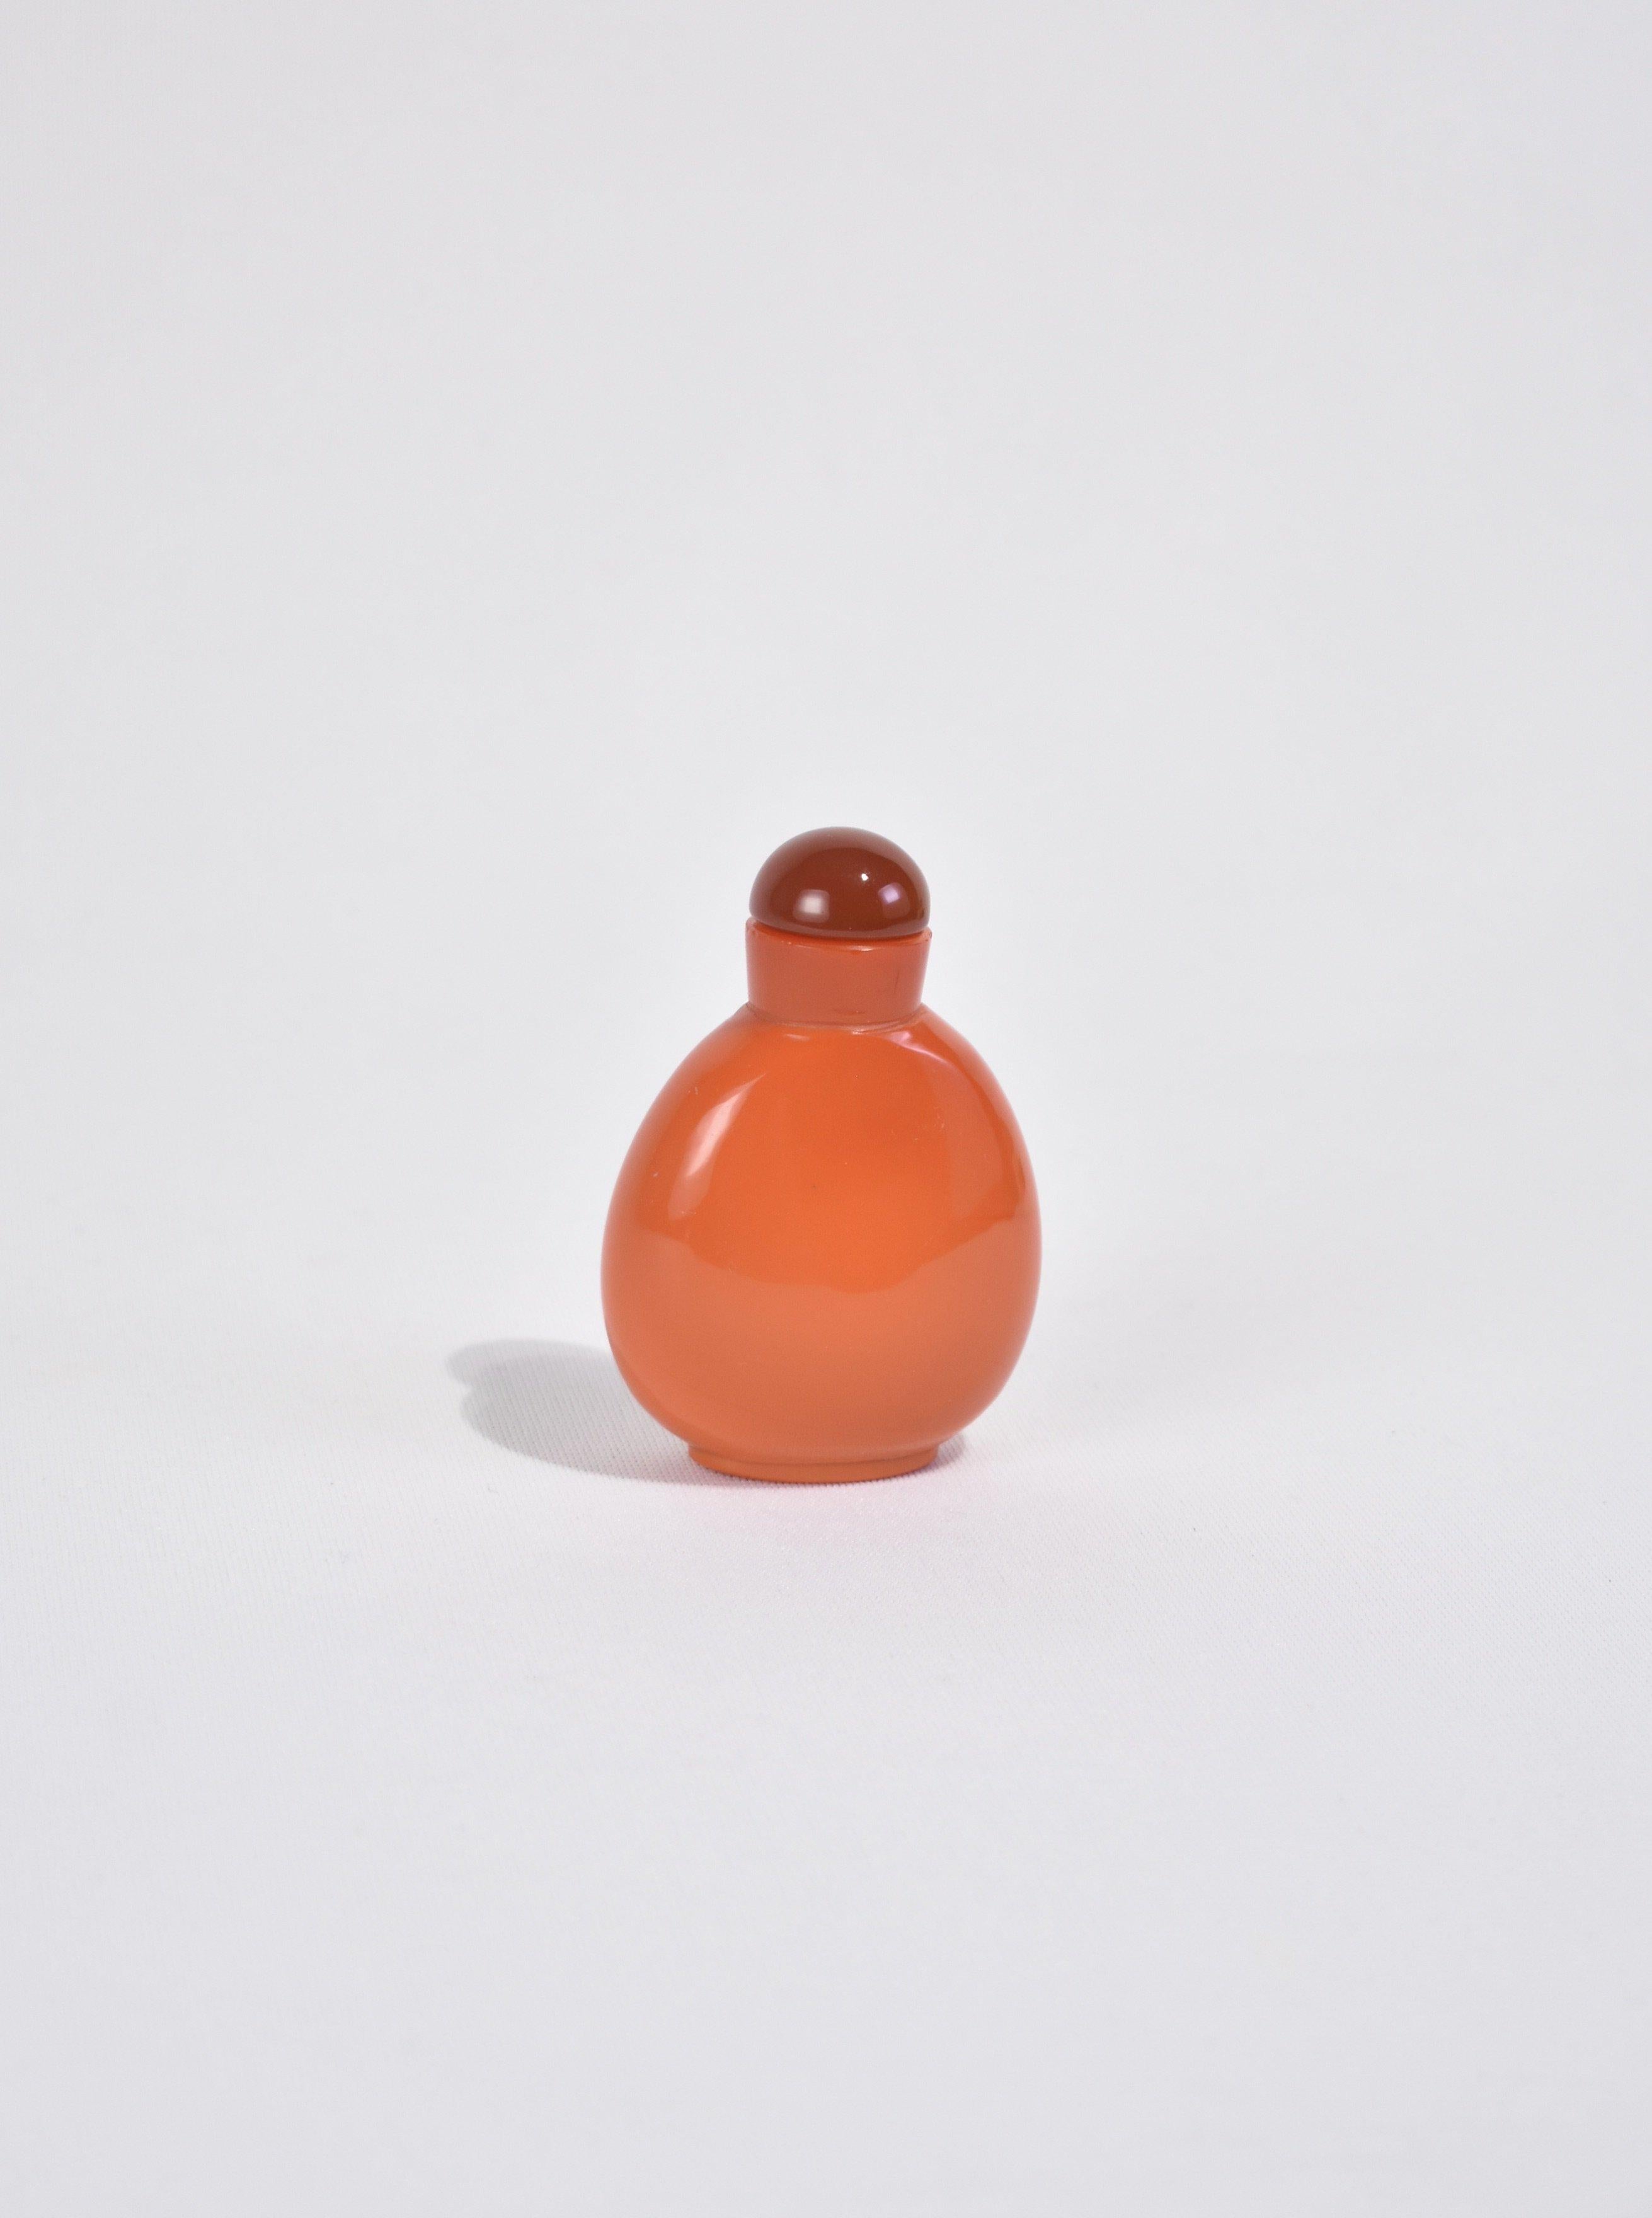 Rare, carnelian red glass snuff bottle. Likely made by Imperial Glassworks for the Qing Dynasty. Ca. 1770 - 1900.